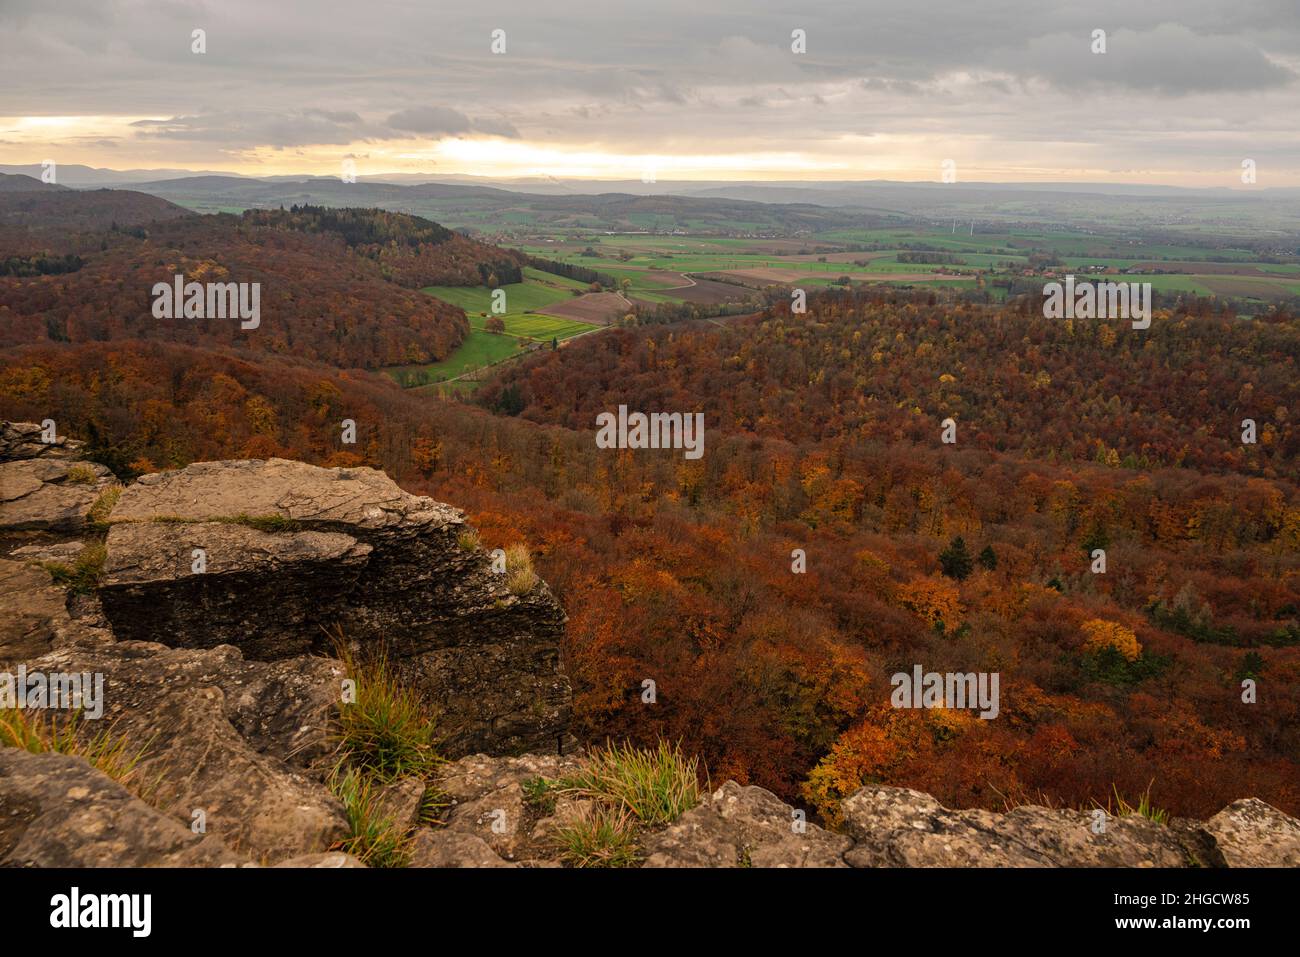 Magnificent panoramic view over an autumnal forest landscape, seen from the Hohenstein rock plateau, Süntel, Weser Uplands, Lower Saxony, Germany Stock Photo